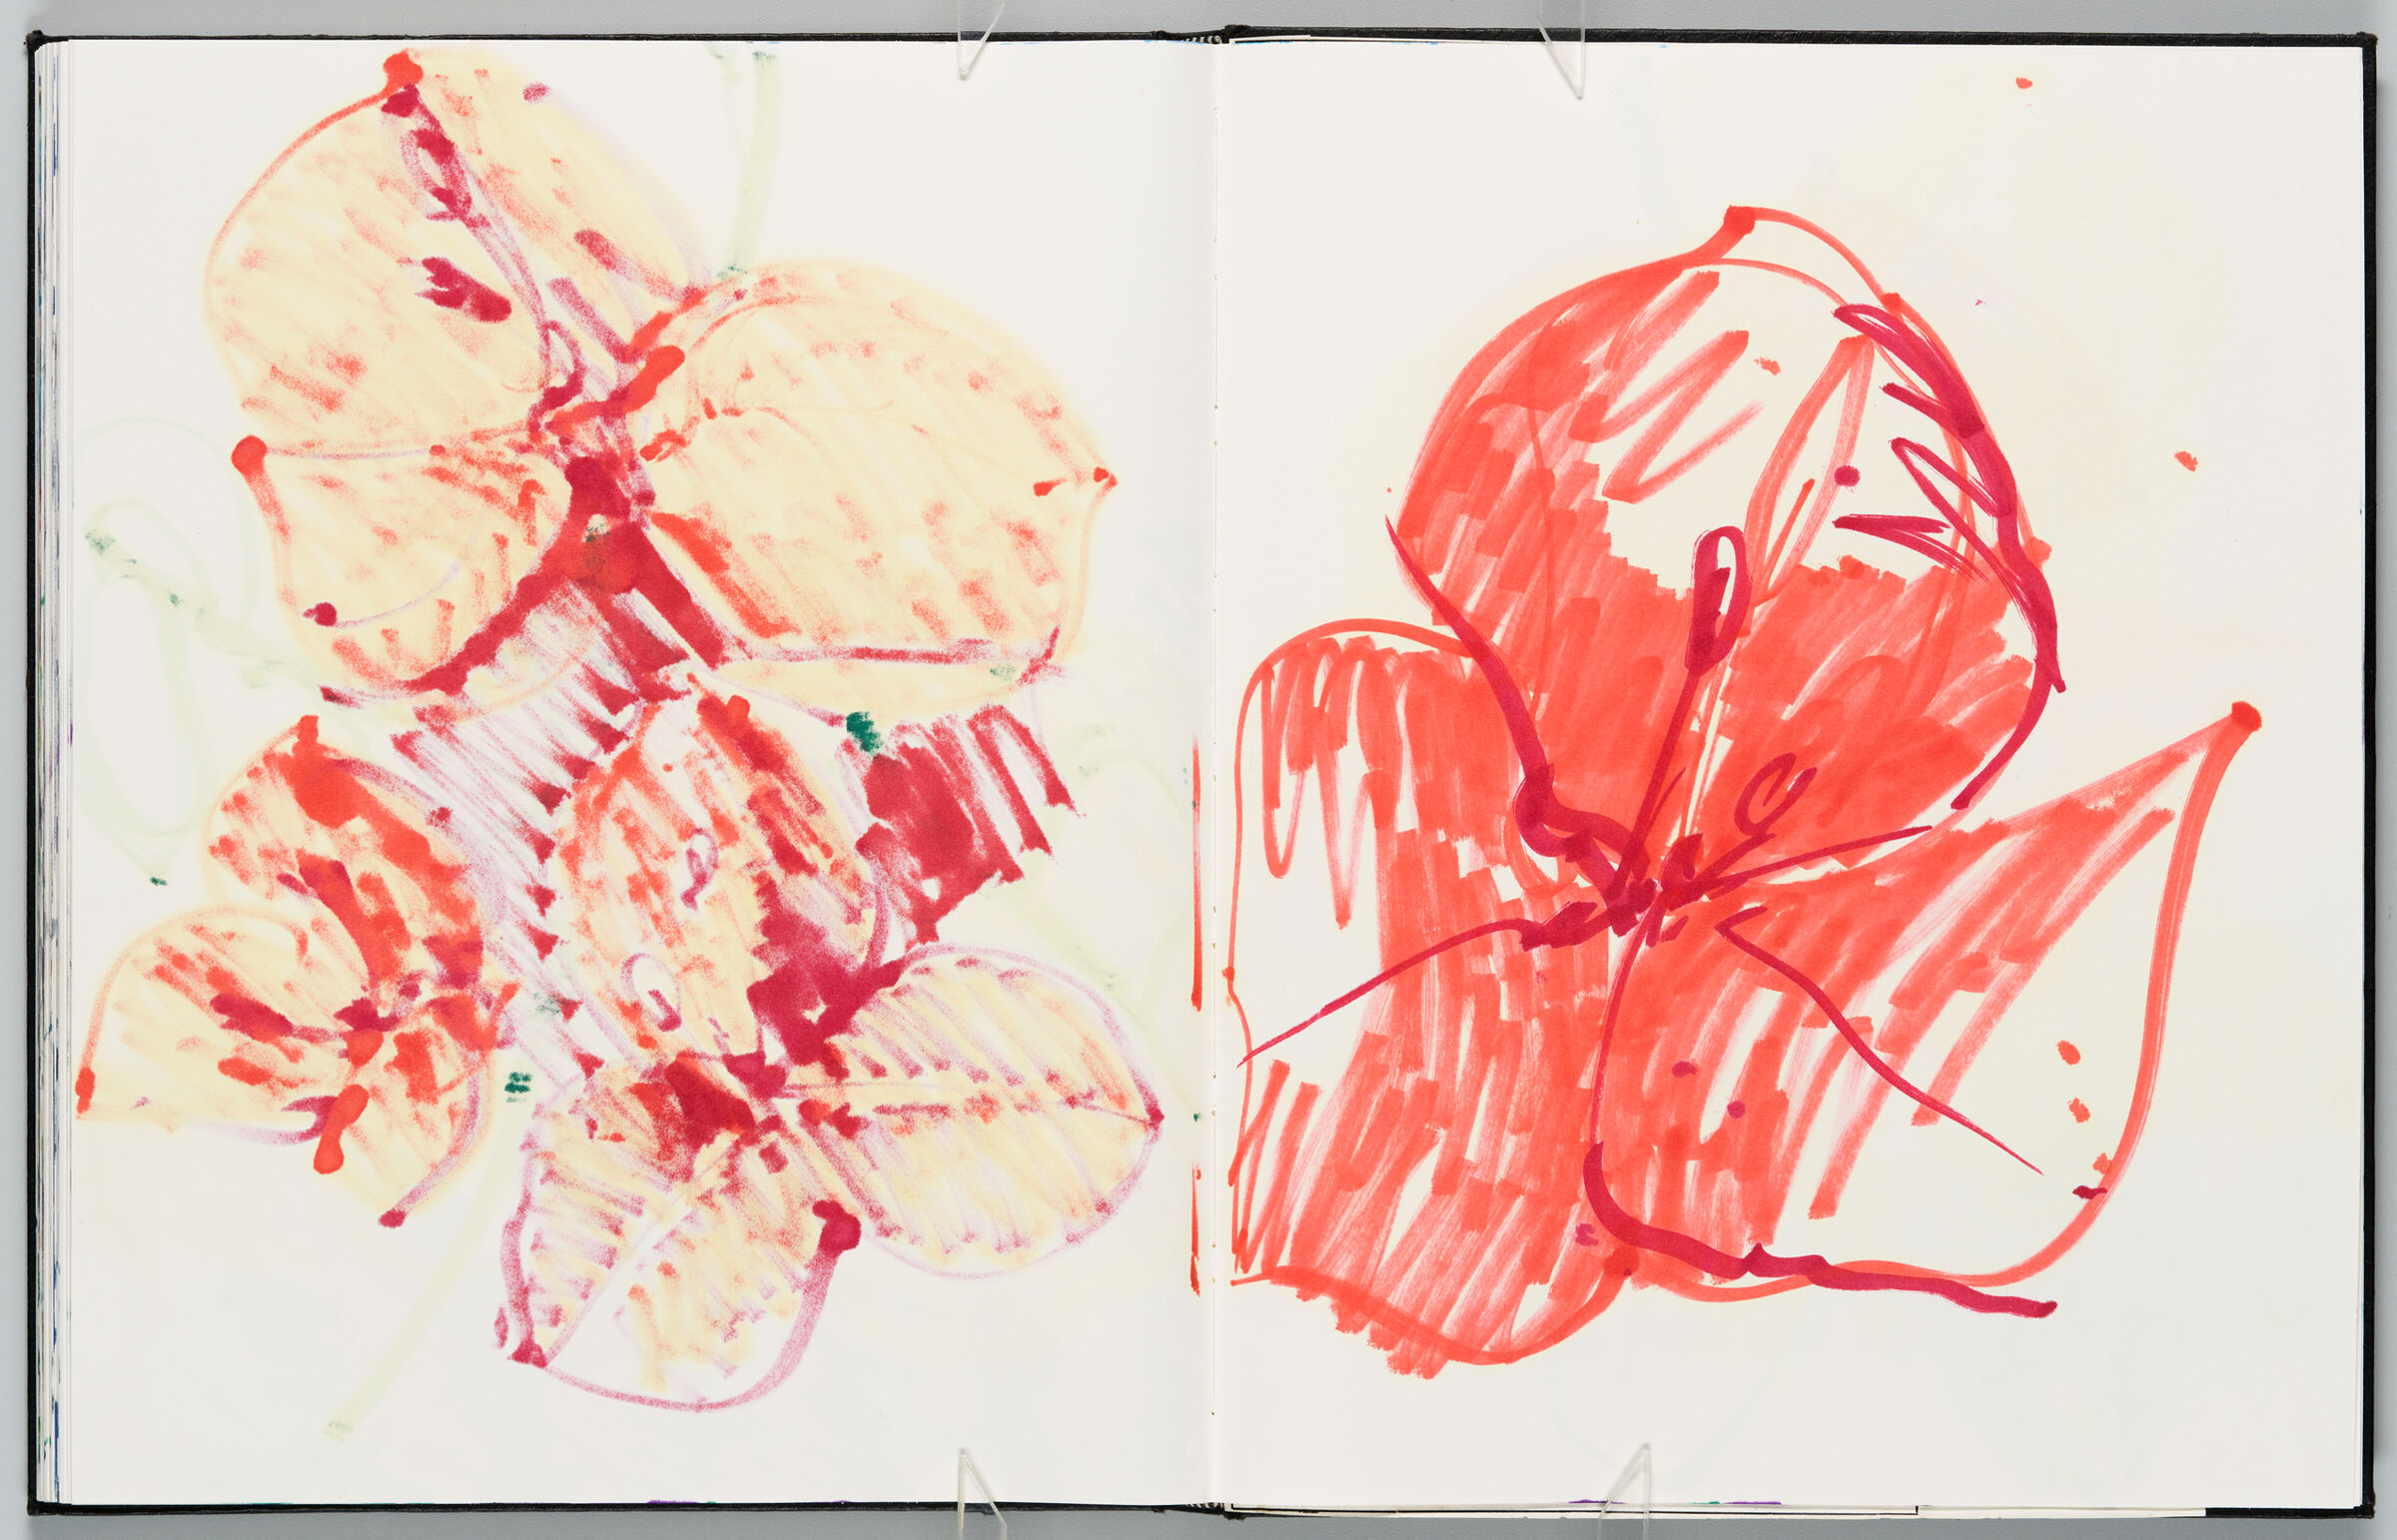 Untitled (Bleed-Through Of Previous Page, Left Page); Untitled (Bougainvillea, Right Page)